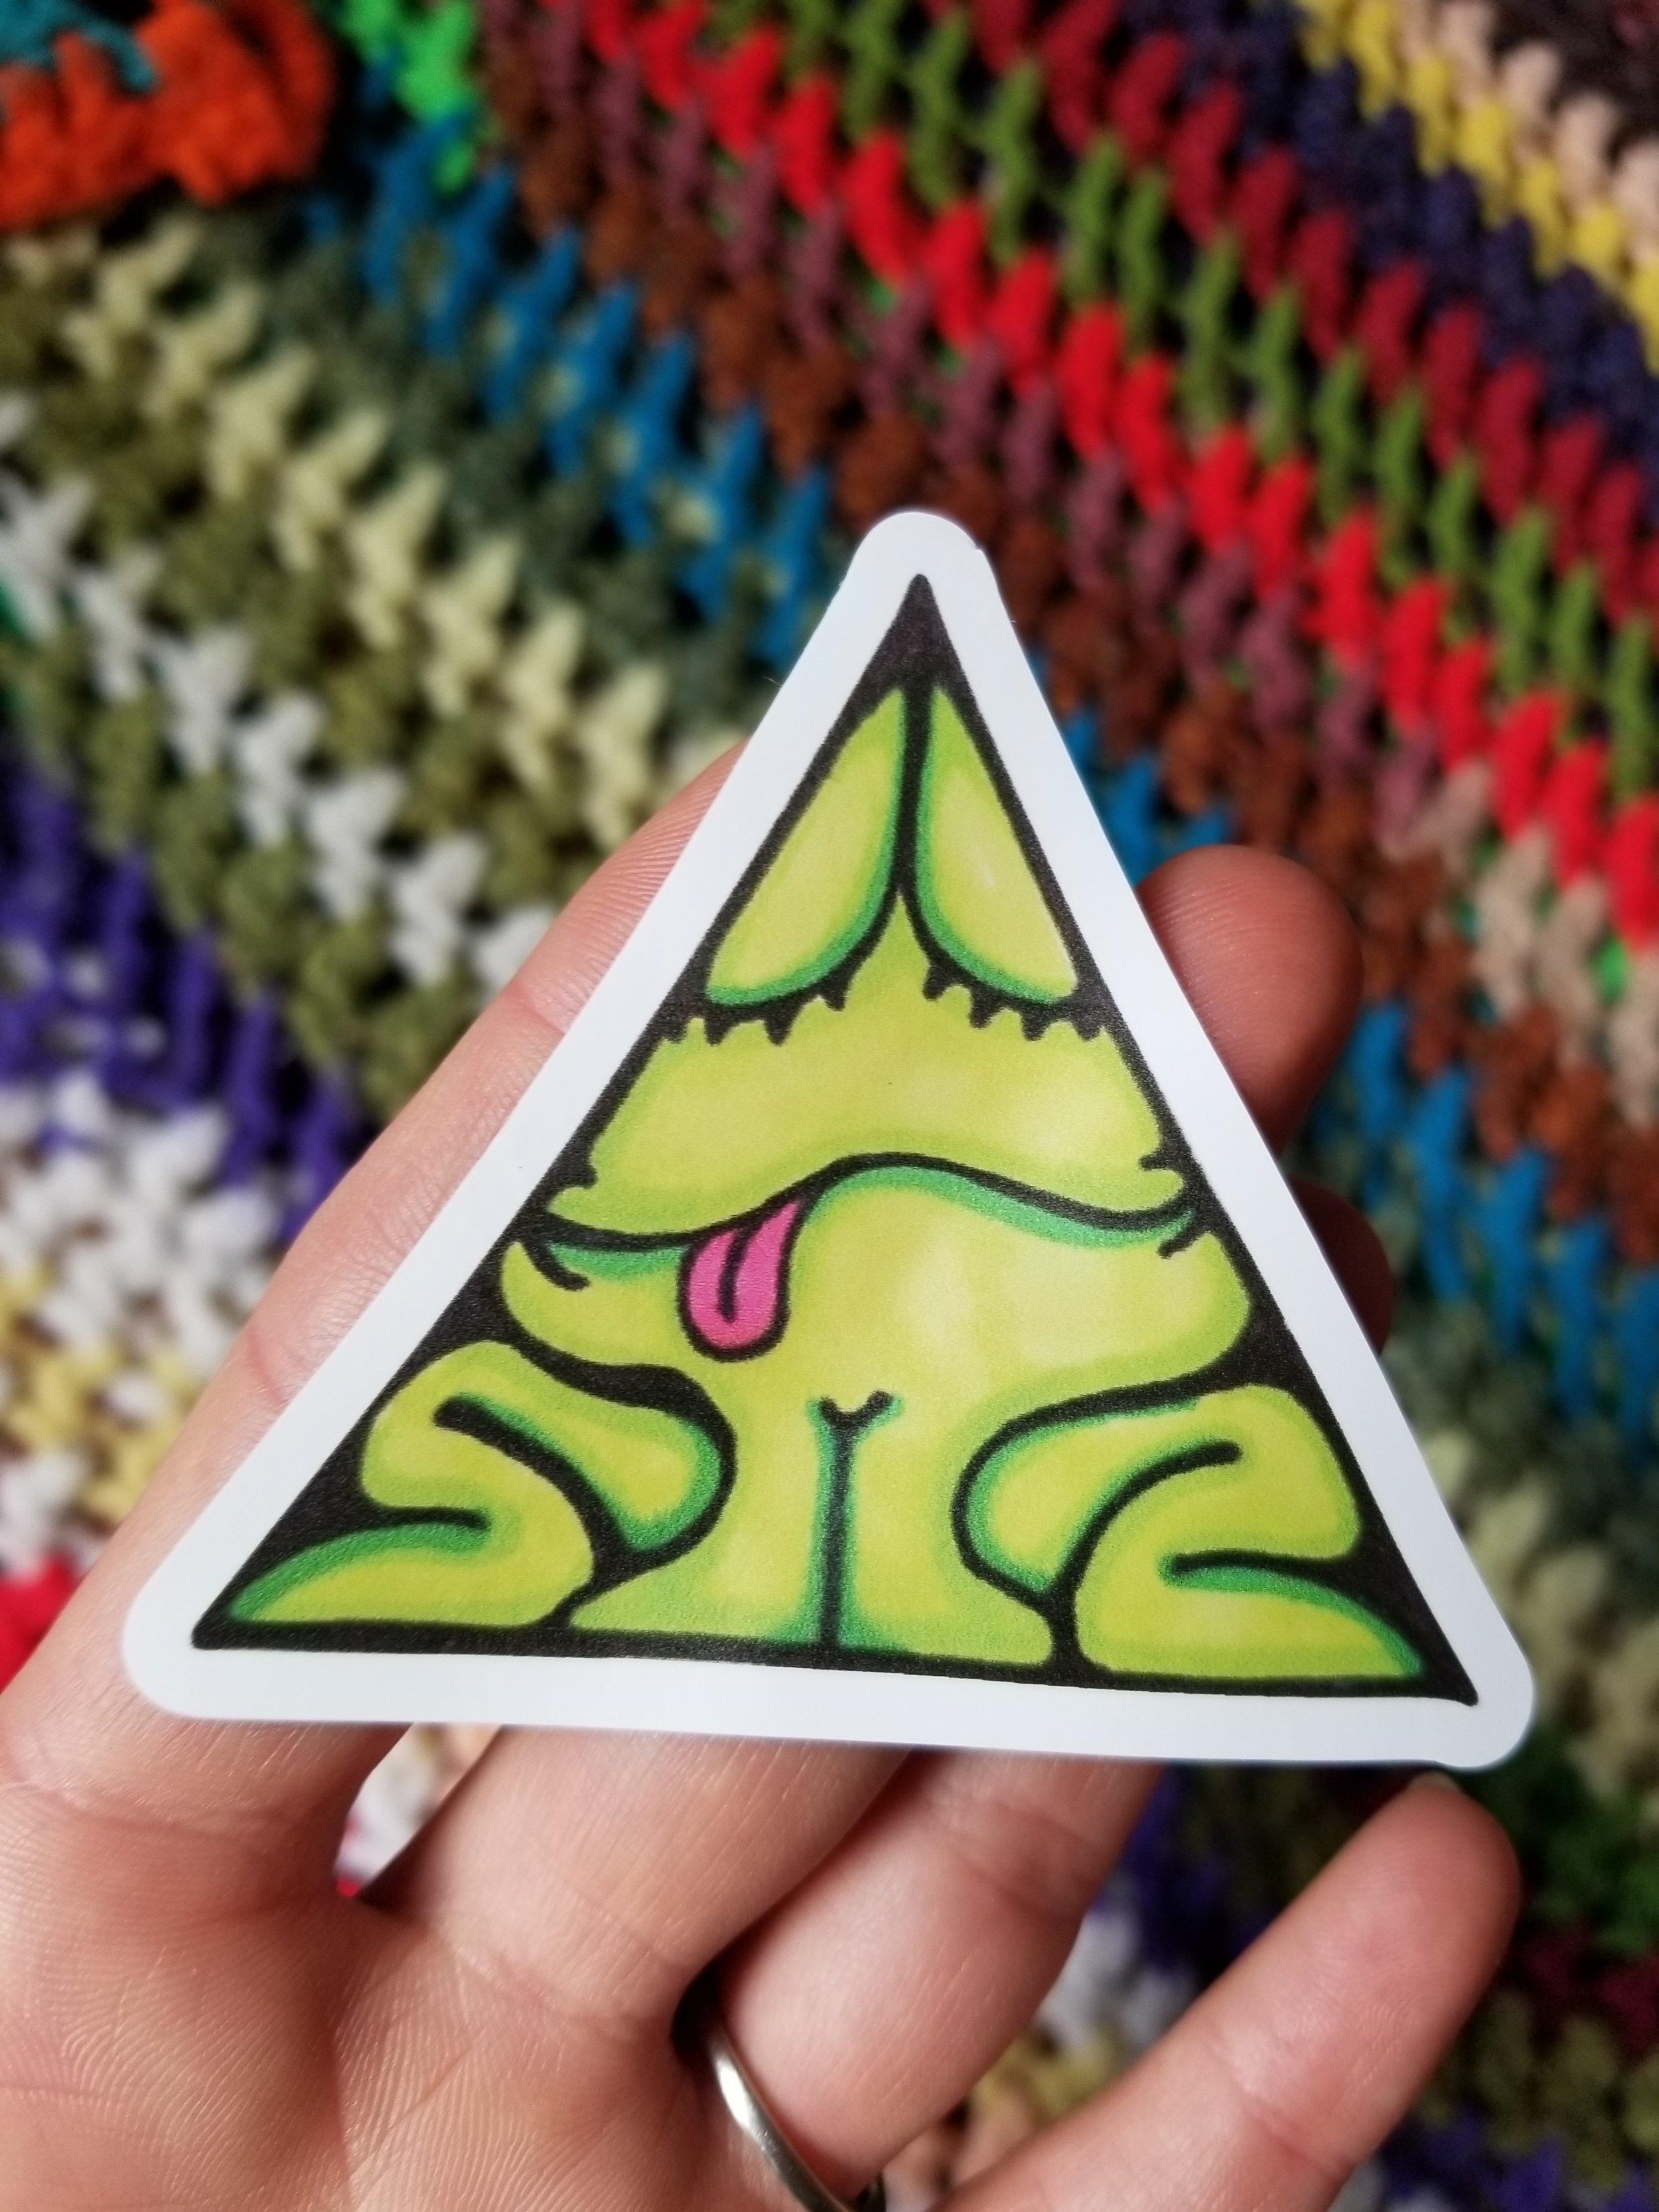 triangle-frog-sticker-buy-stickers-from-independent-artists-unique-artisan-stickers.jpg